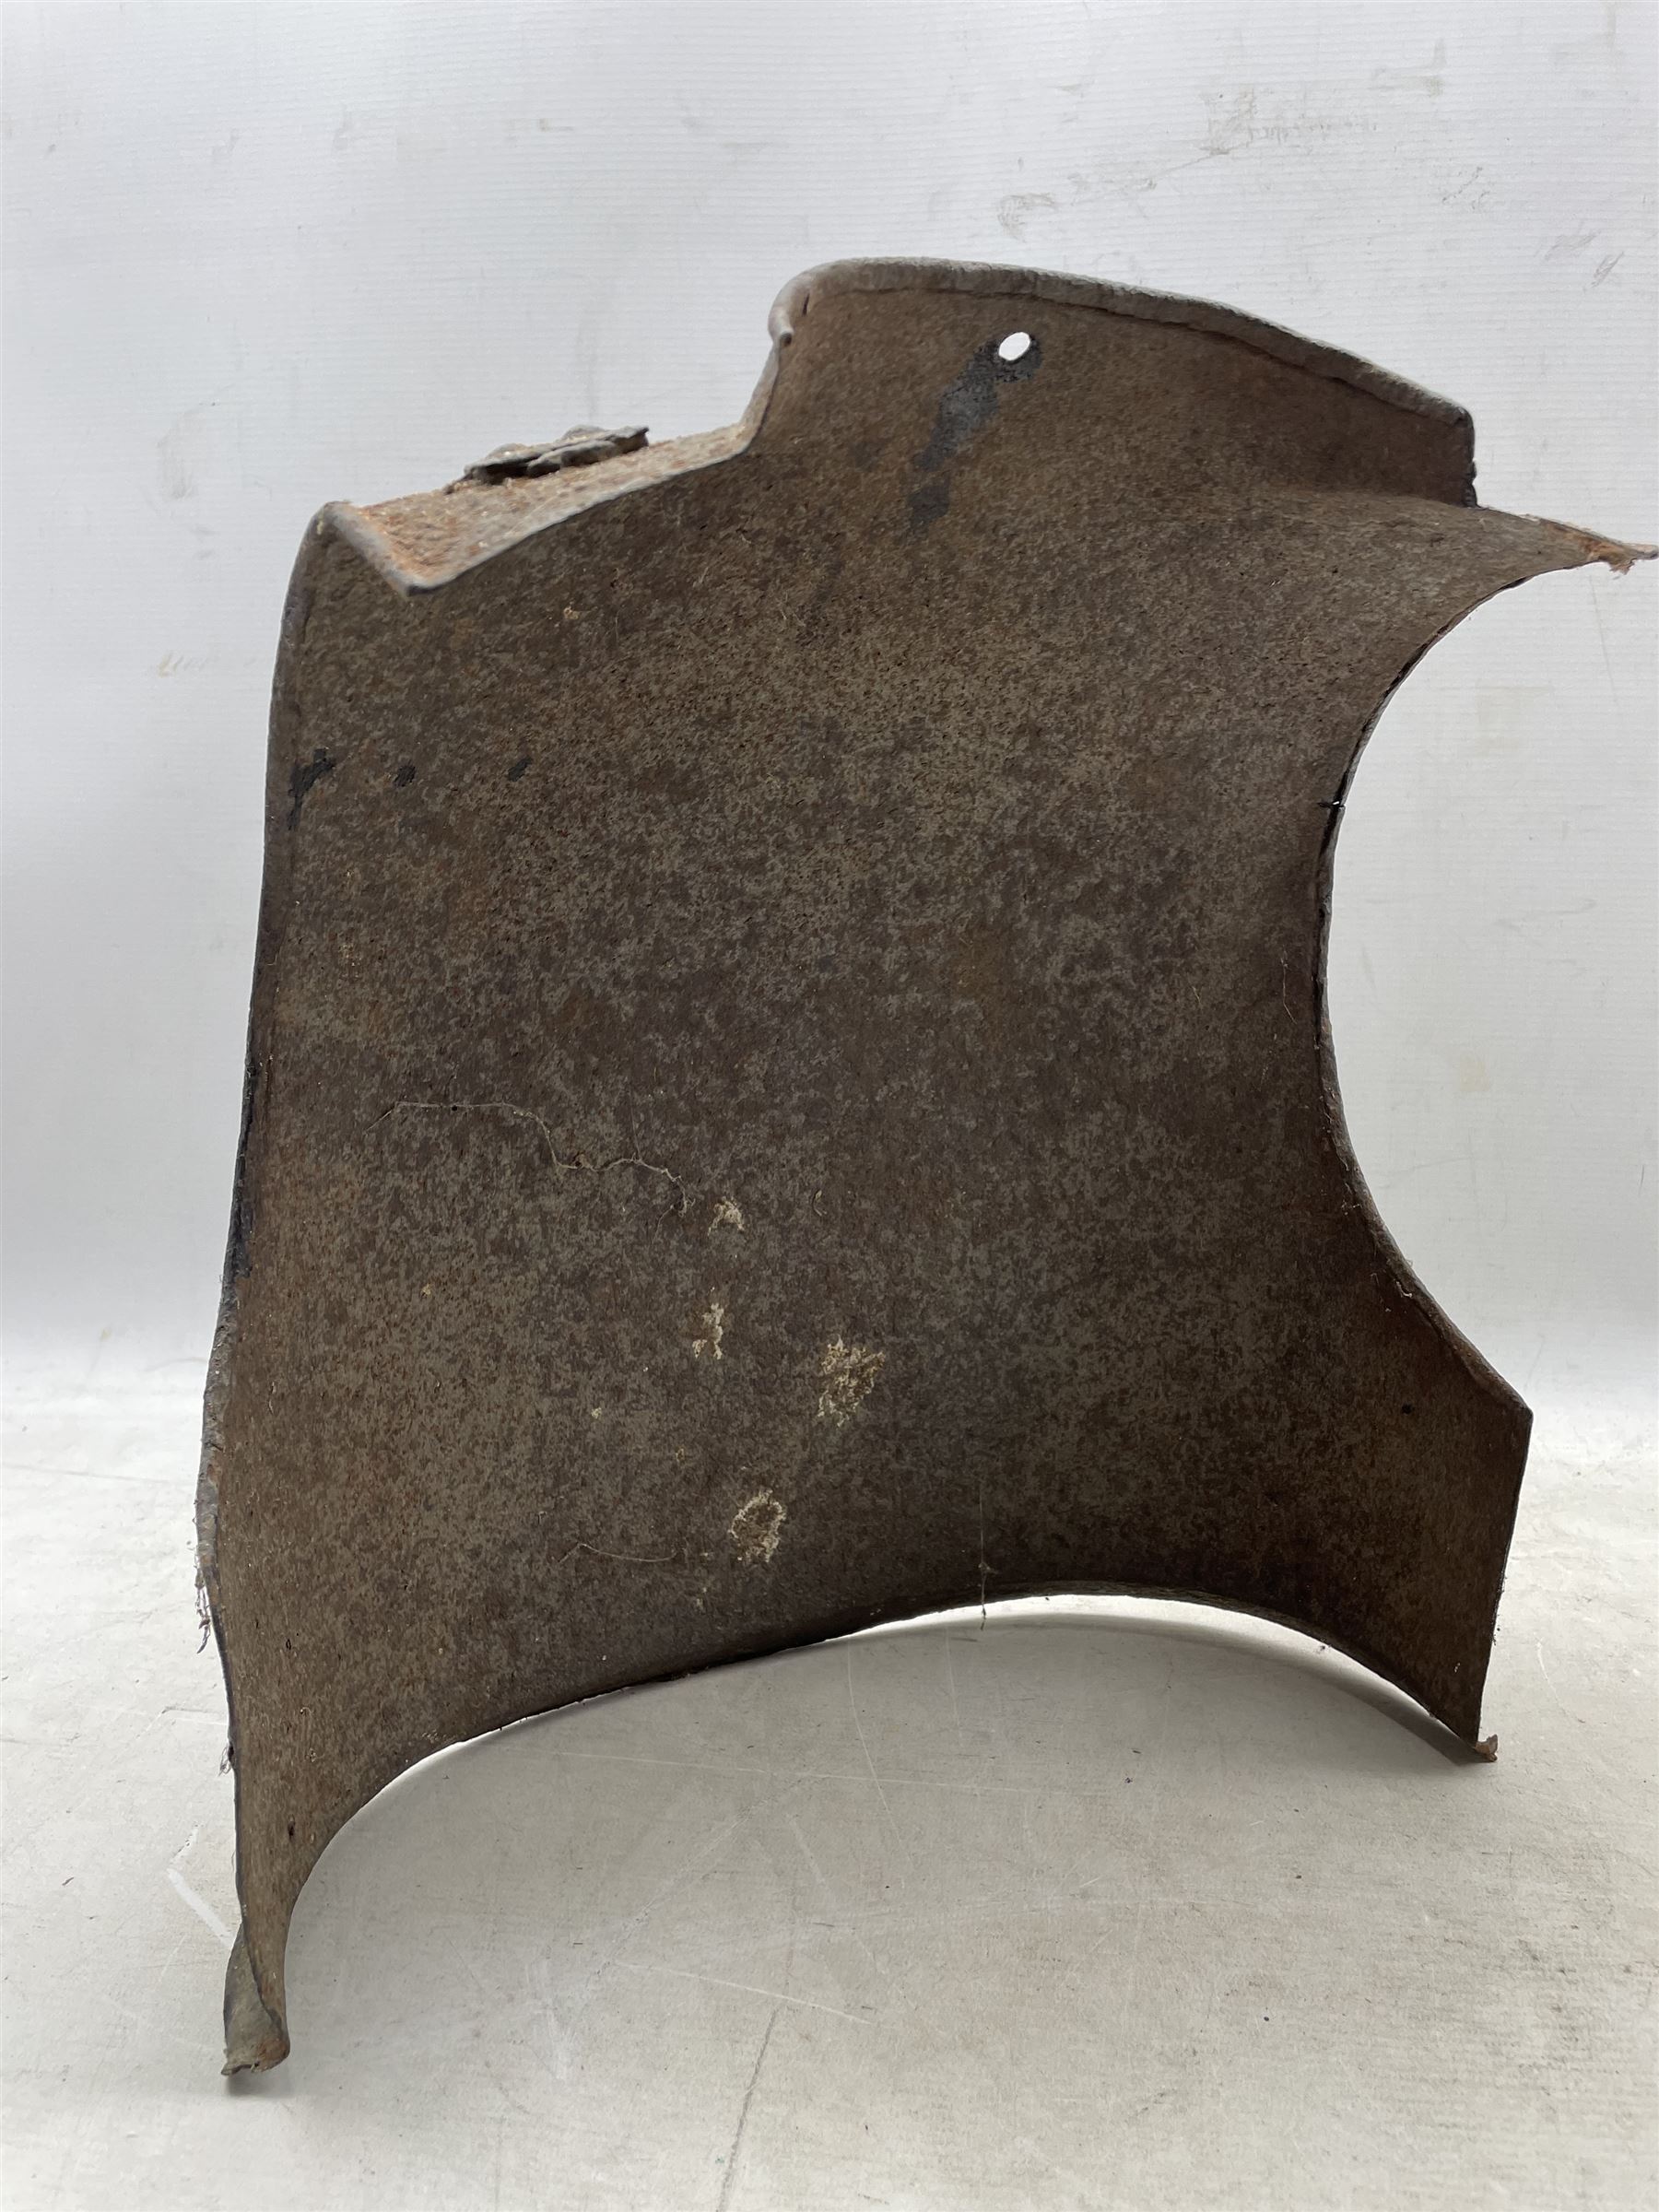 English Civil War period back plate H38cm x W32cm and a lobster tail helmet skull (2) - Image 3 of 7